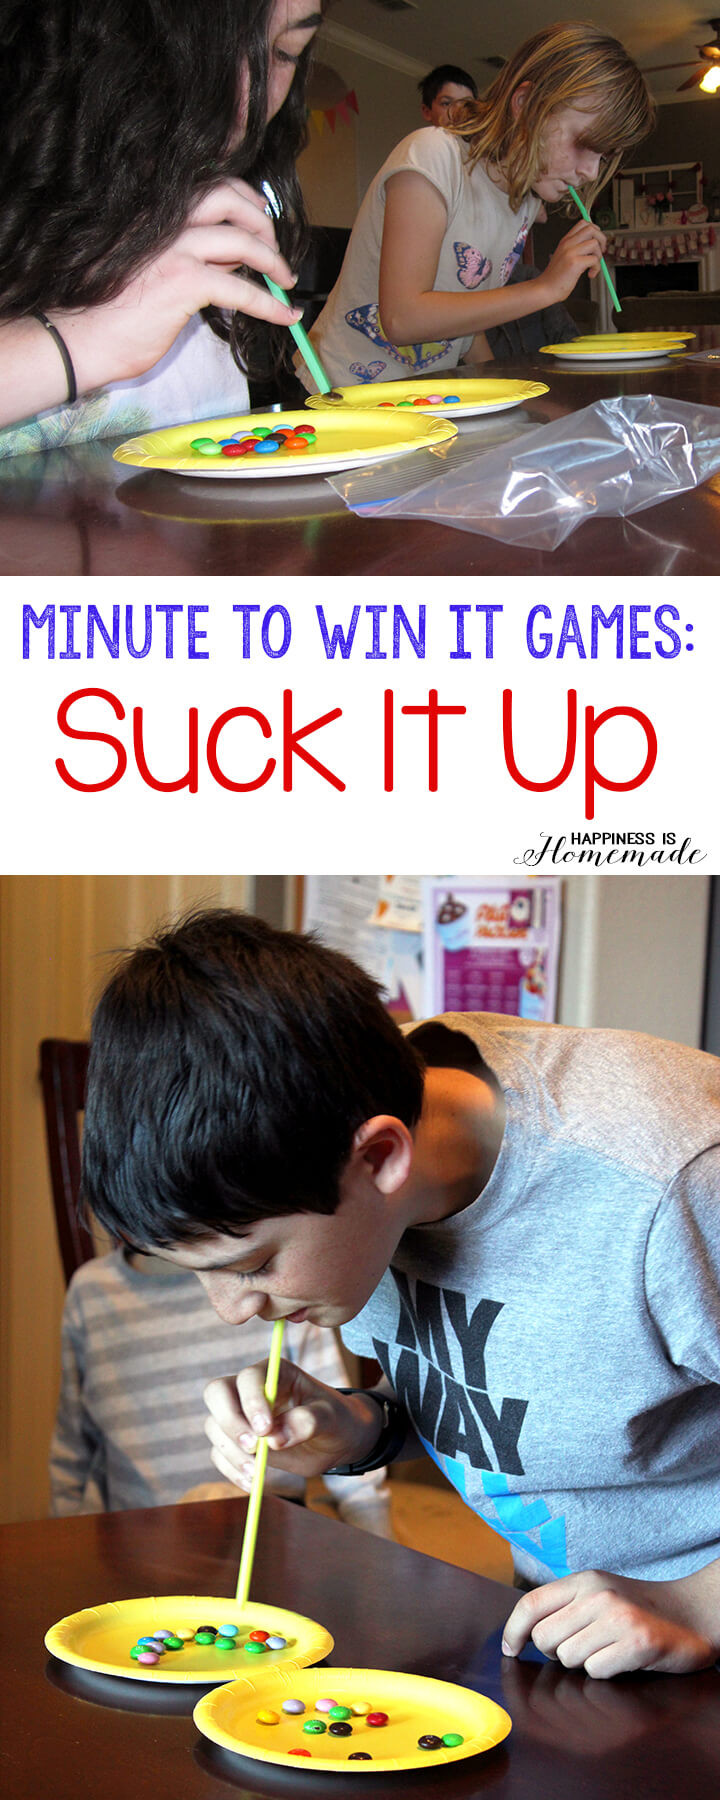 Fun Party Games For Kids
 Over 13 Awesome Minute to Win It Party Games for Kids